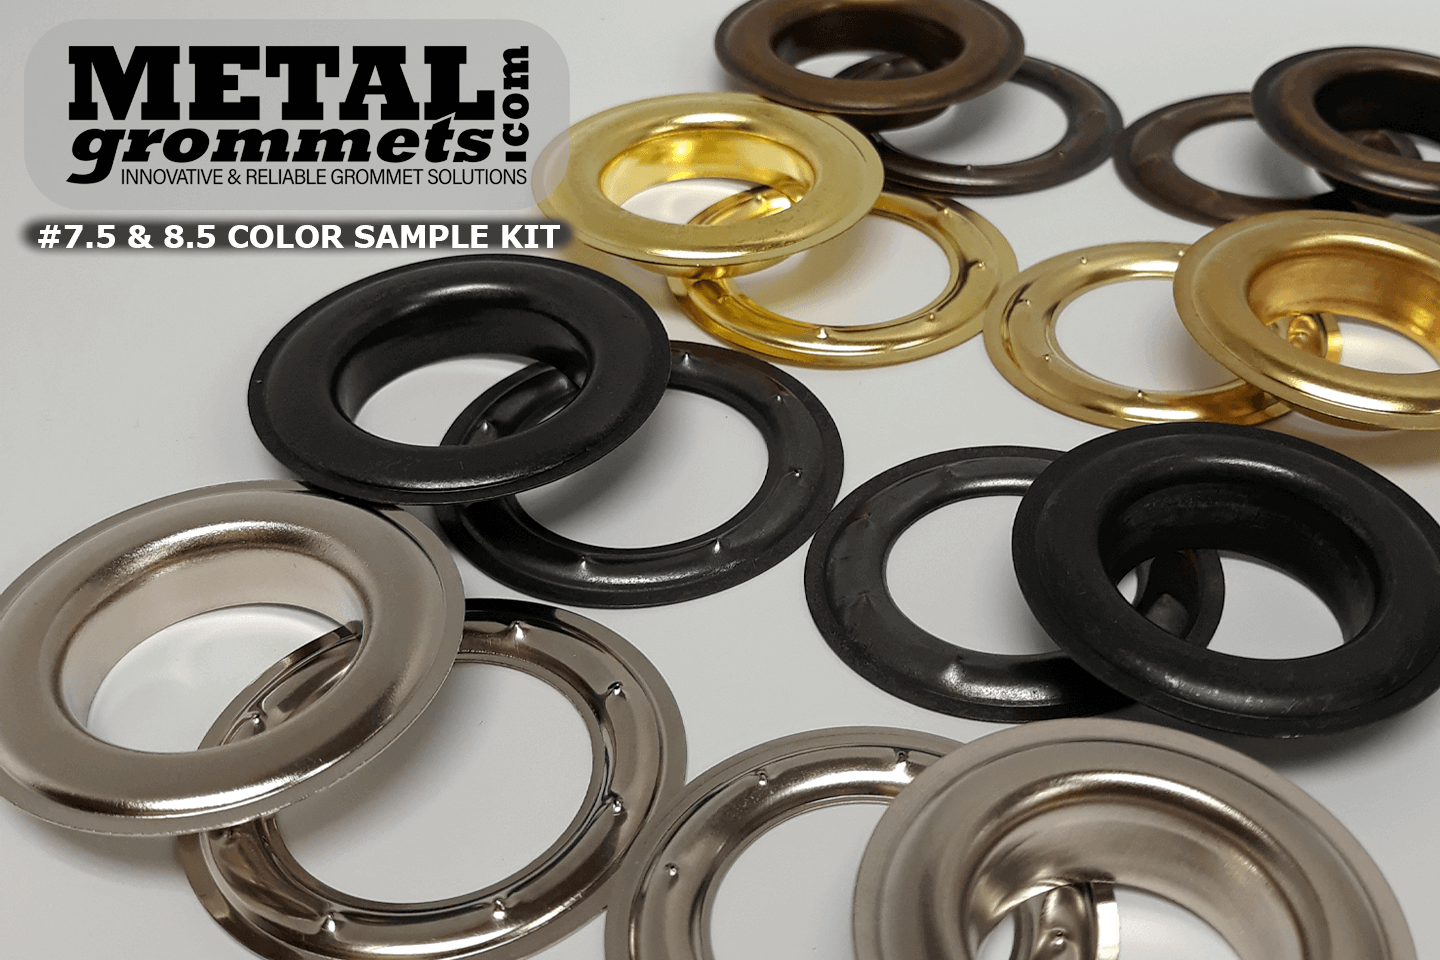 Eyelets & Grommets: What's the Difference?